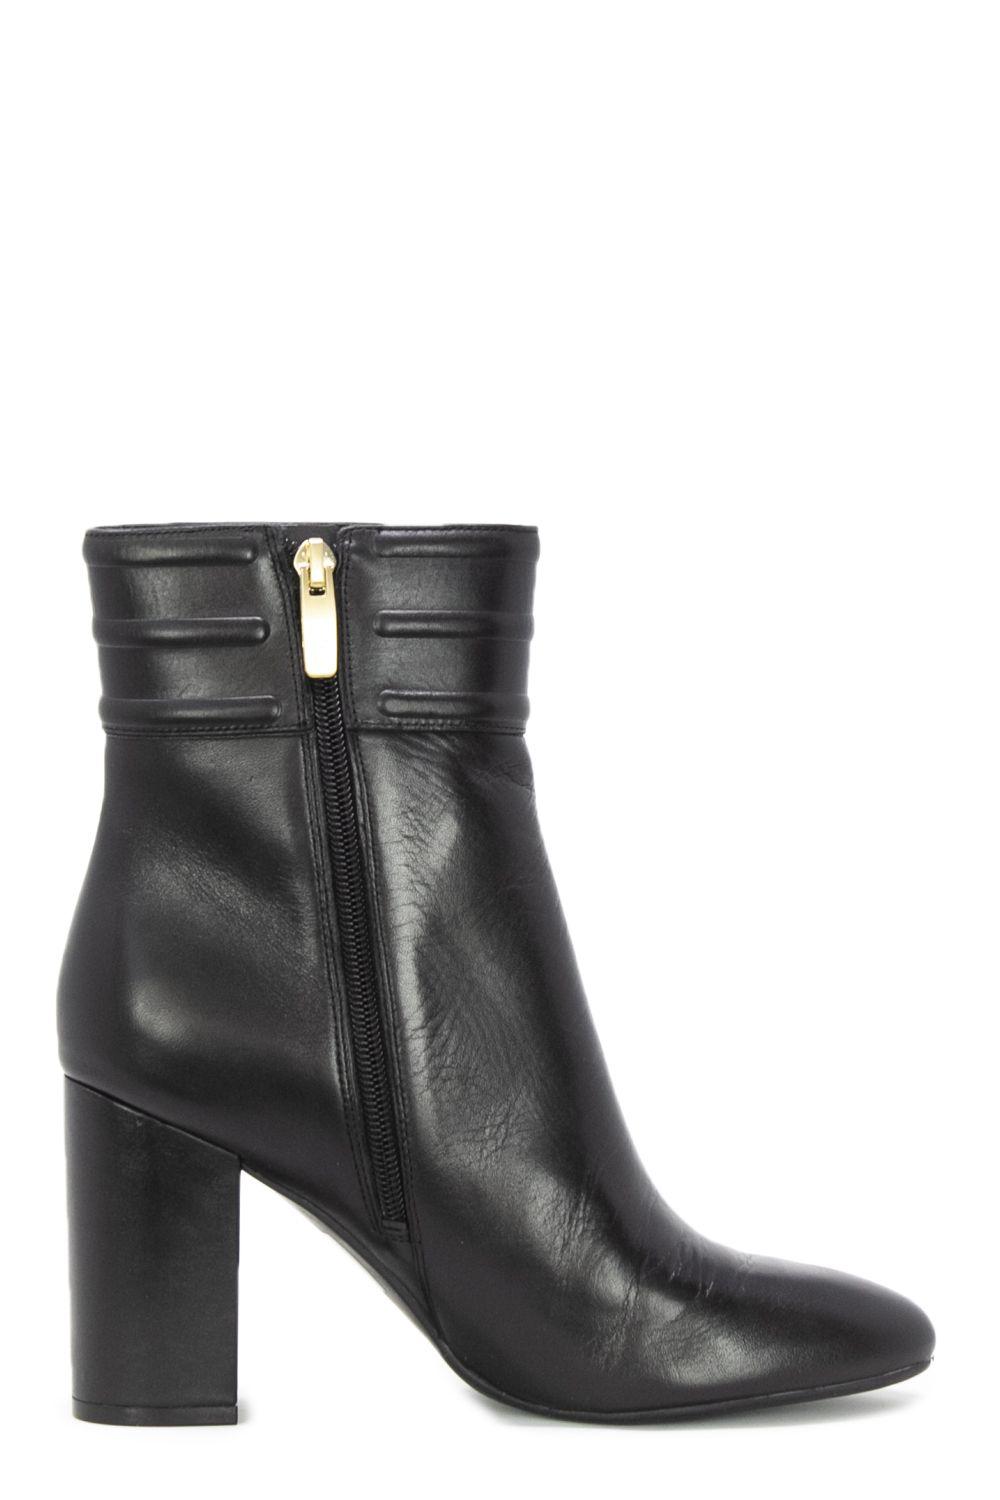 Guess Black Leather Ankle Boots in Black - Lyst